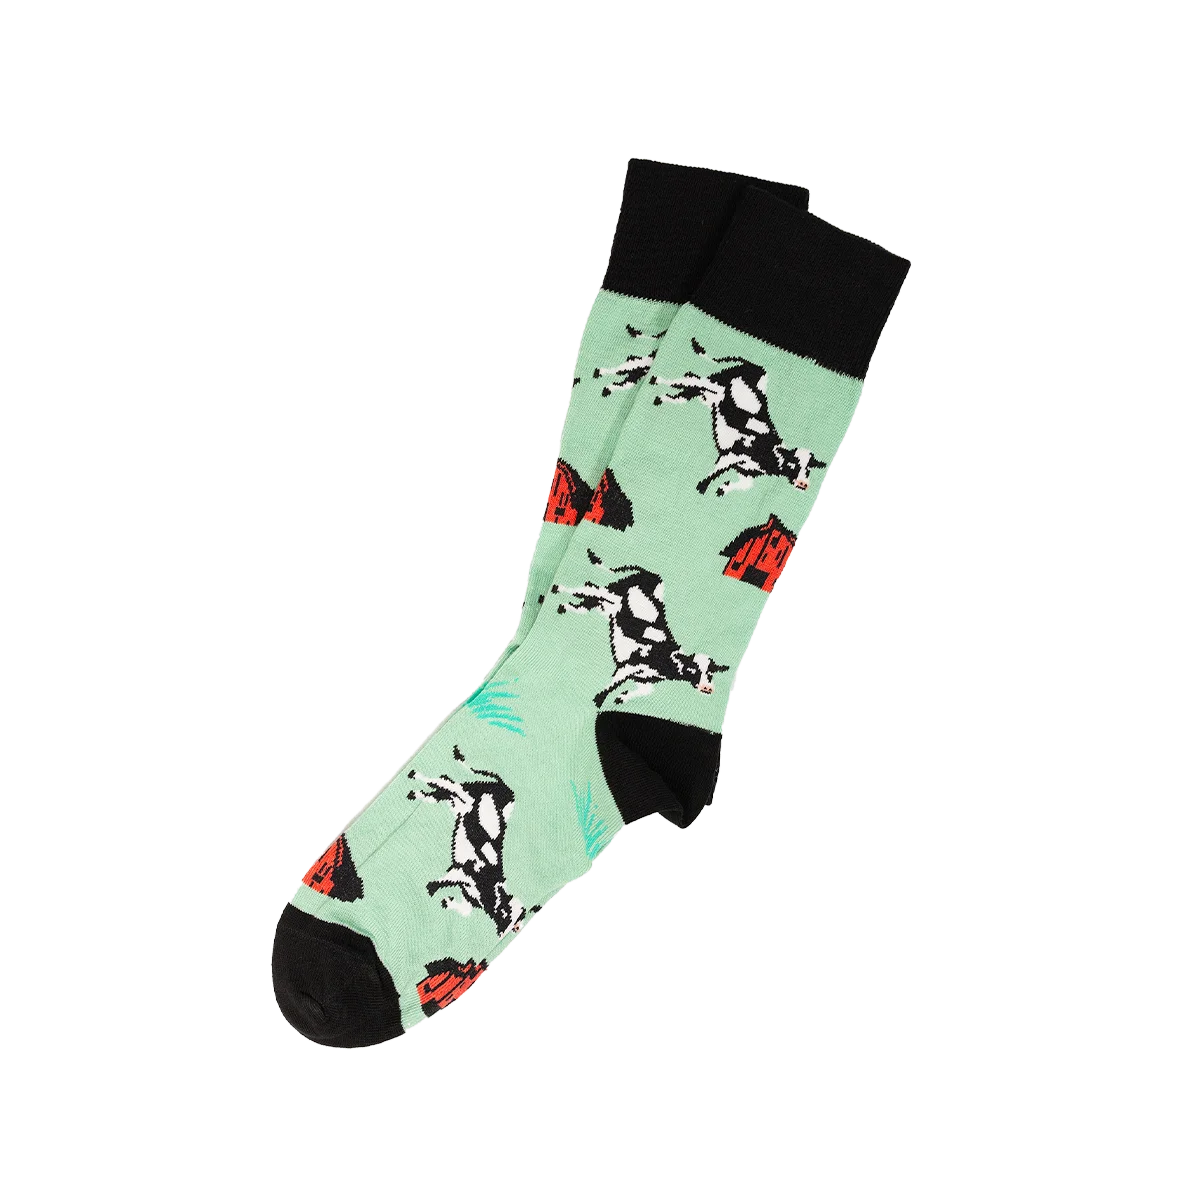 Visit the Holstein & Barn Socks Product Page